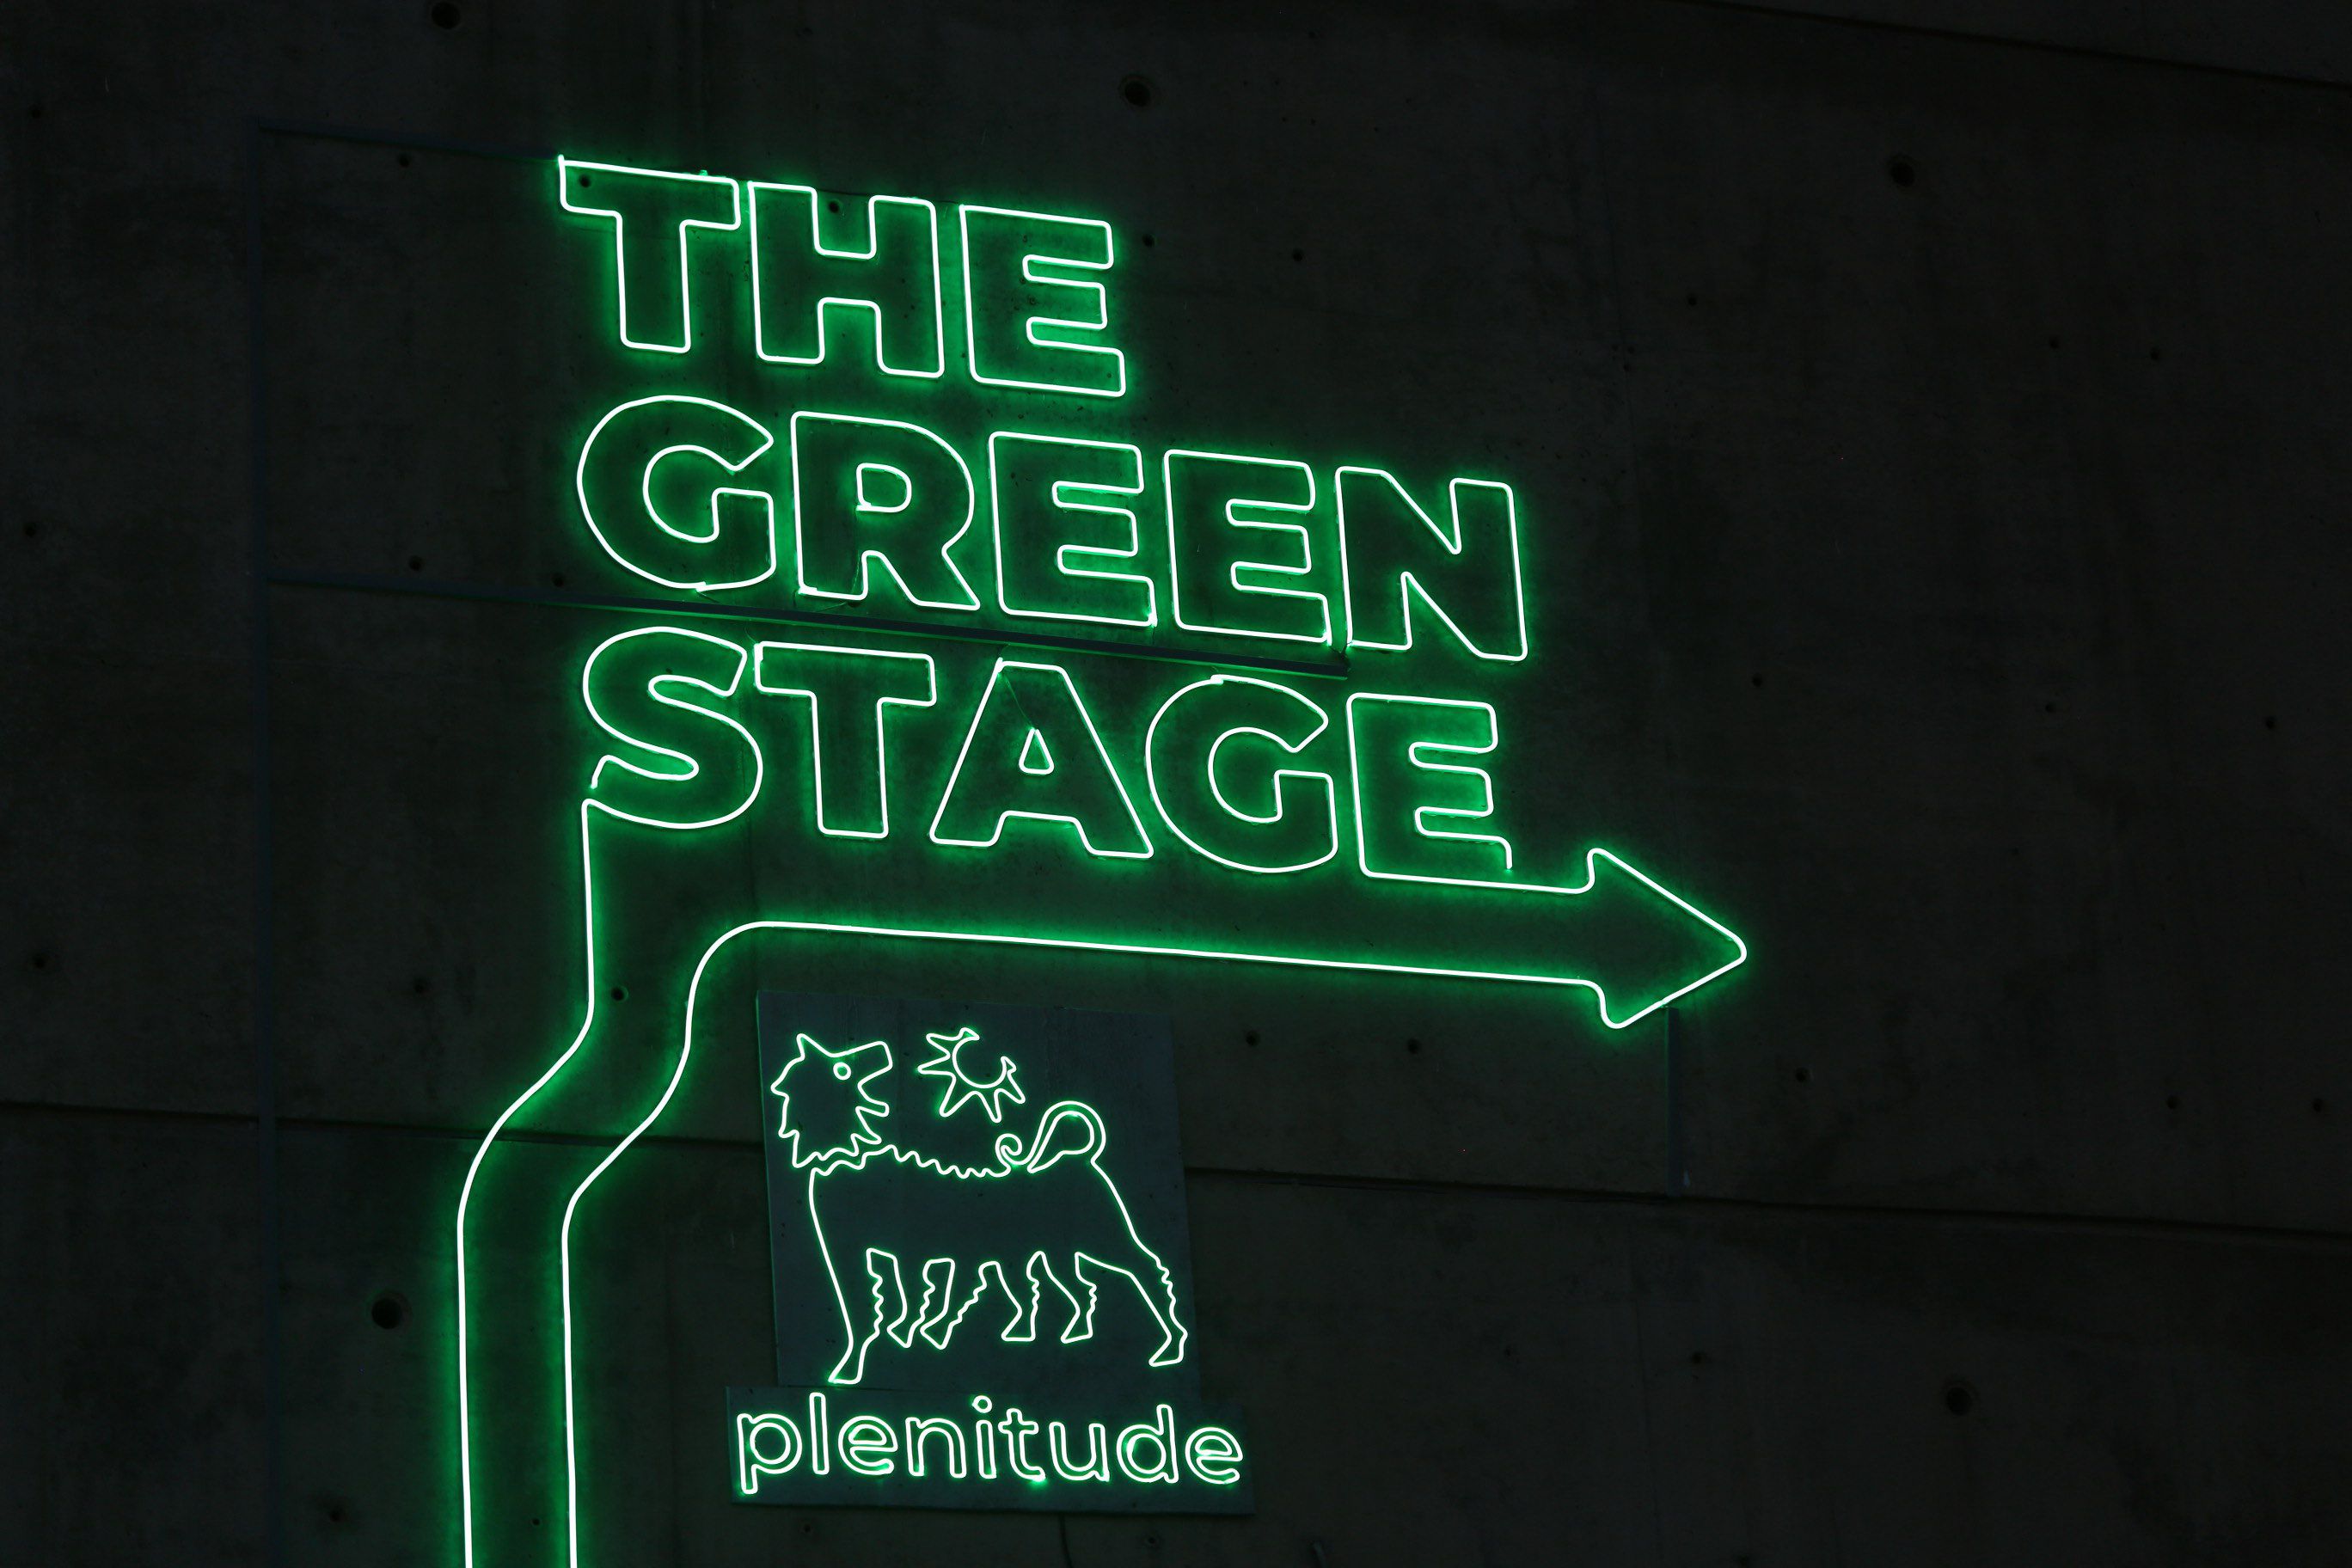 Lettering 'The Green Stage', green, in neon, with an arrow pointing to the right. Below, in green neon, the symbol of Plenitude, a six-legged dog with its face turned towards the sun and the sign 'Plenitude'.